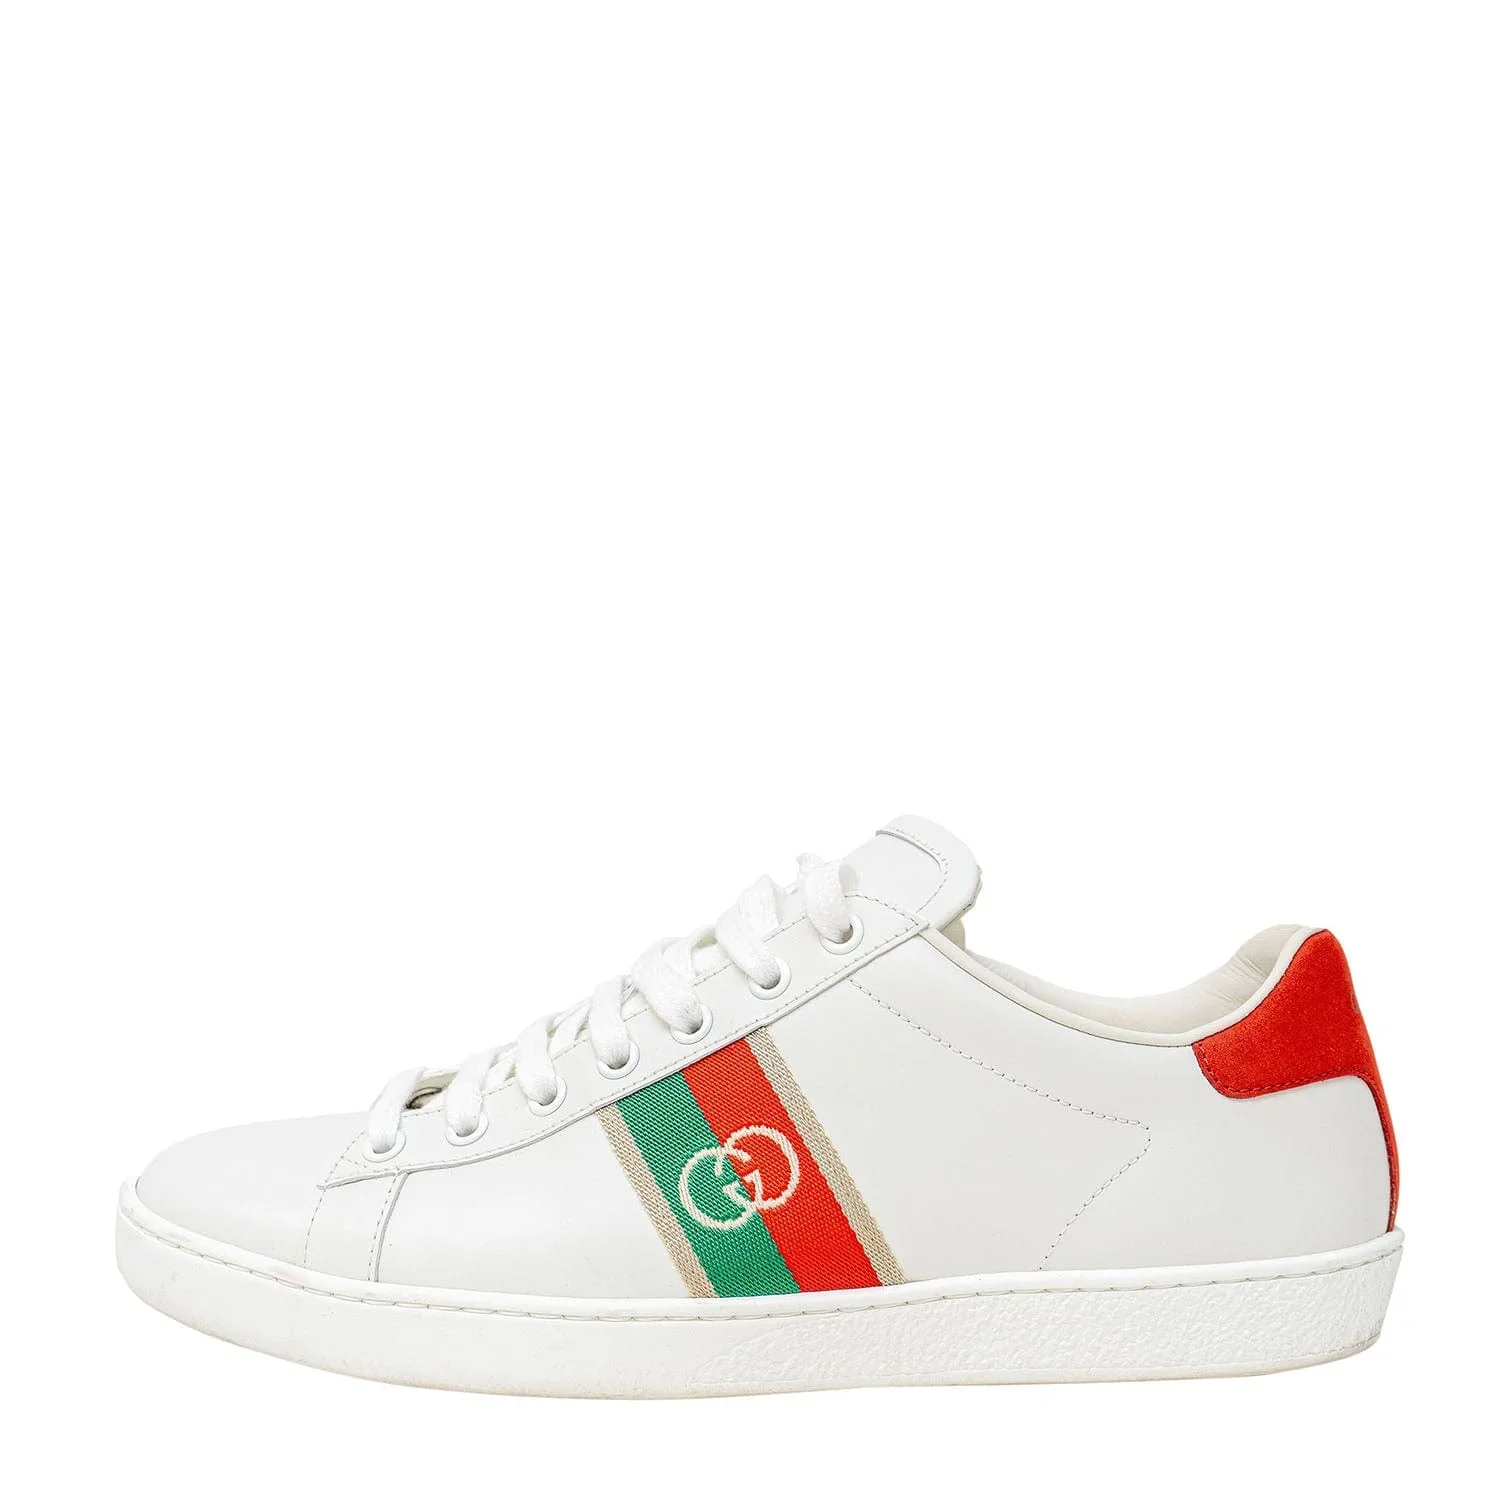 Image of Gucci Ace Interlocking G Sneakers 39.5 SYCH147